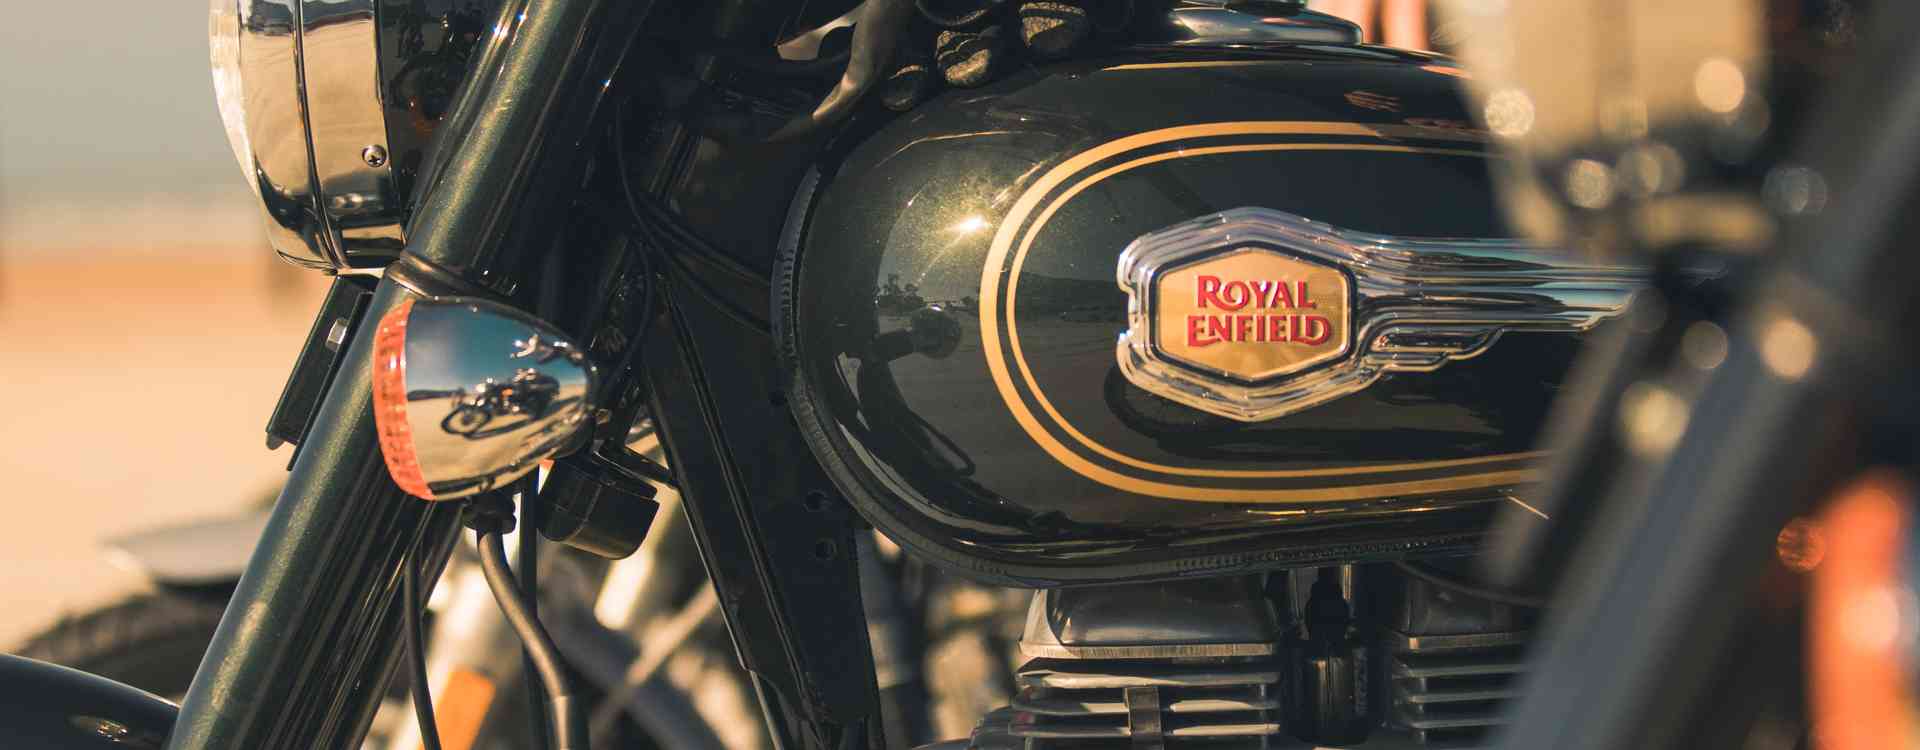 Bullet 500-Reliability on the Road